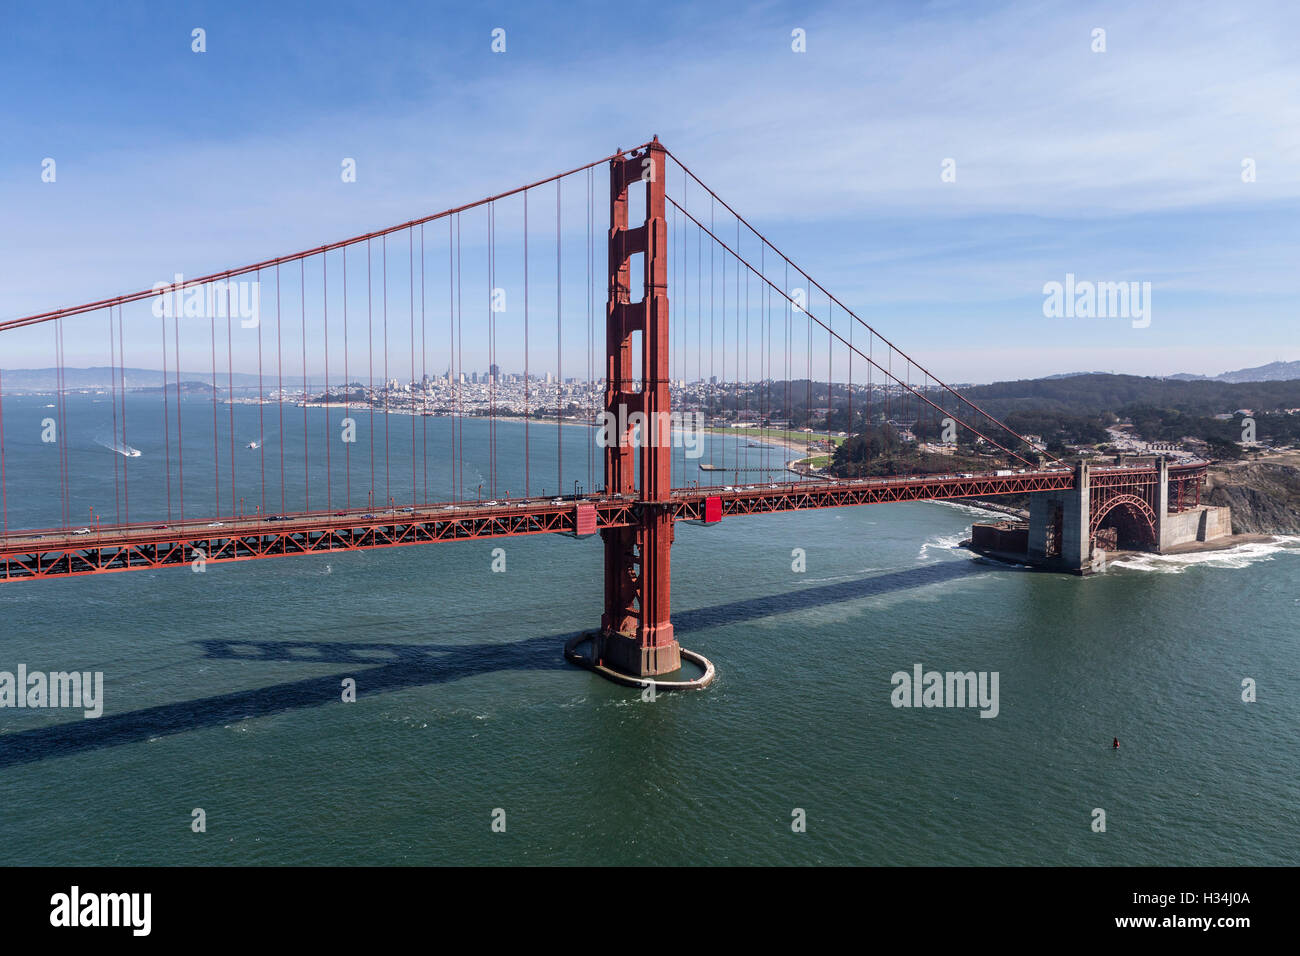 Aerial view of the Golden Gate Bridge with San Francisco in background. Stock Photo